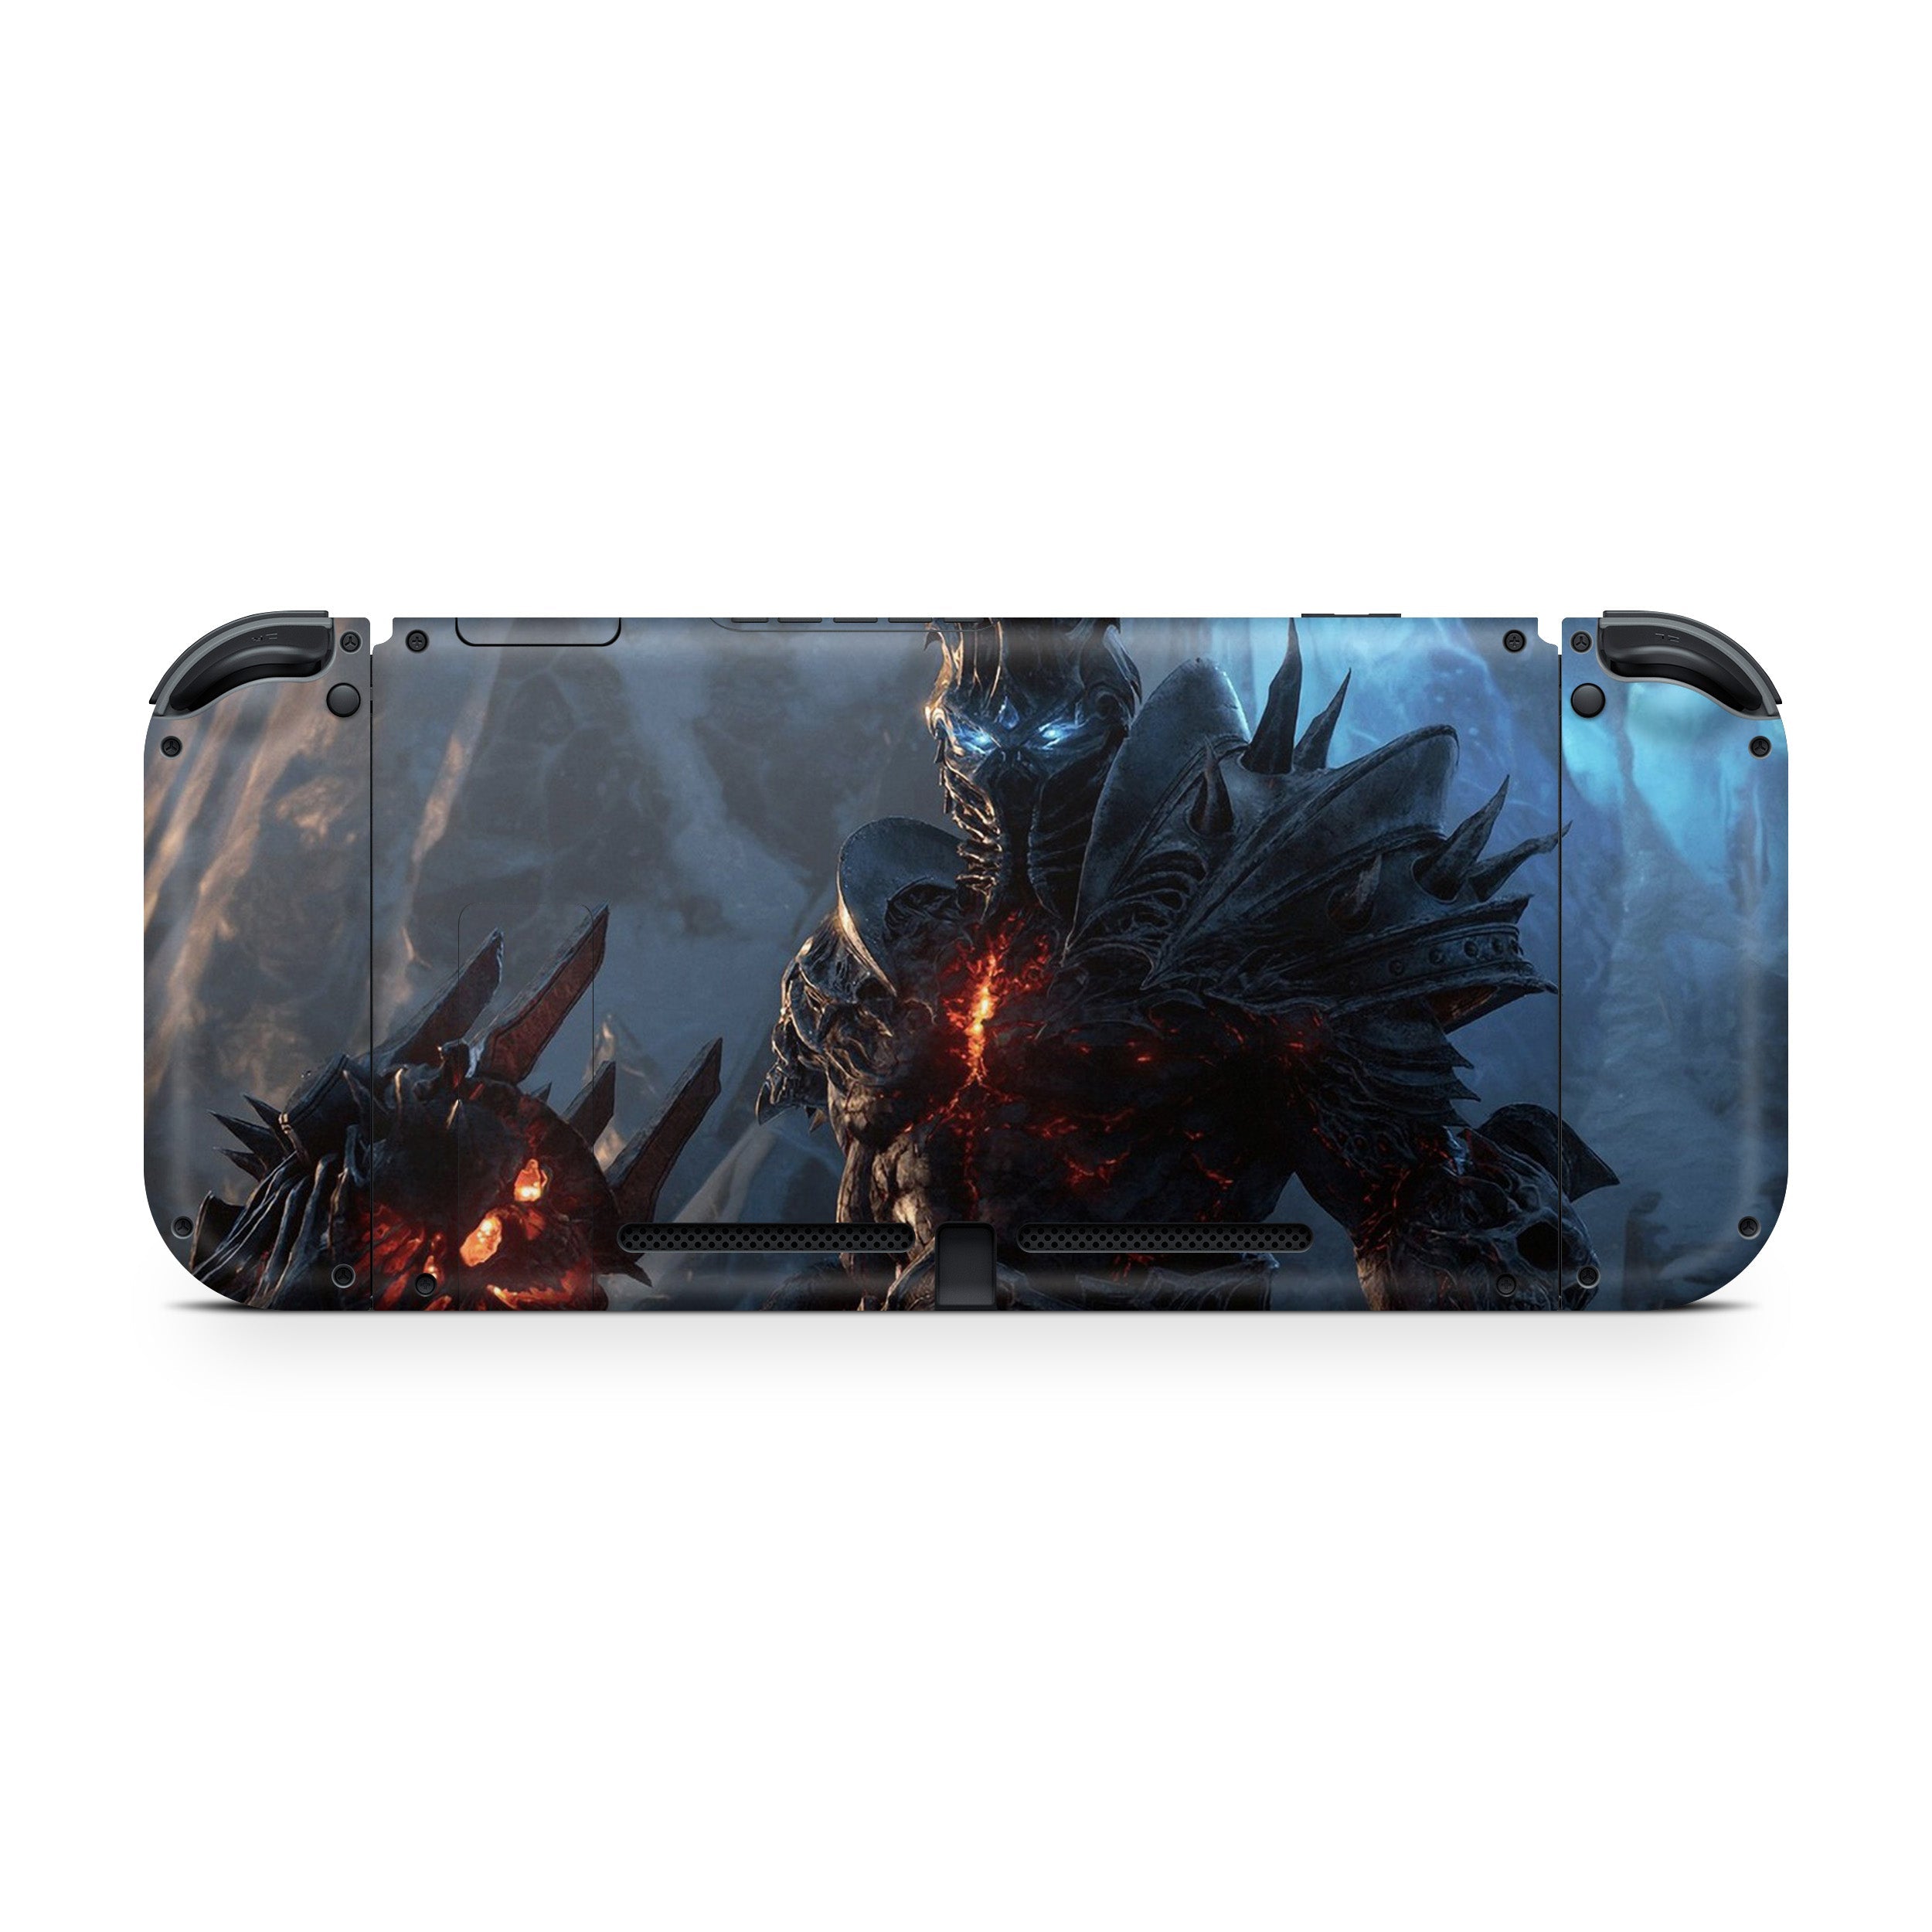 A video game skin featuring a World of Warcraft design for the Nintendo Switch.